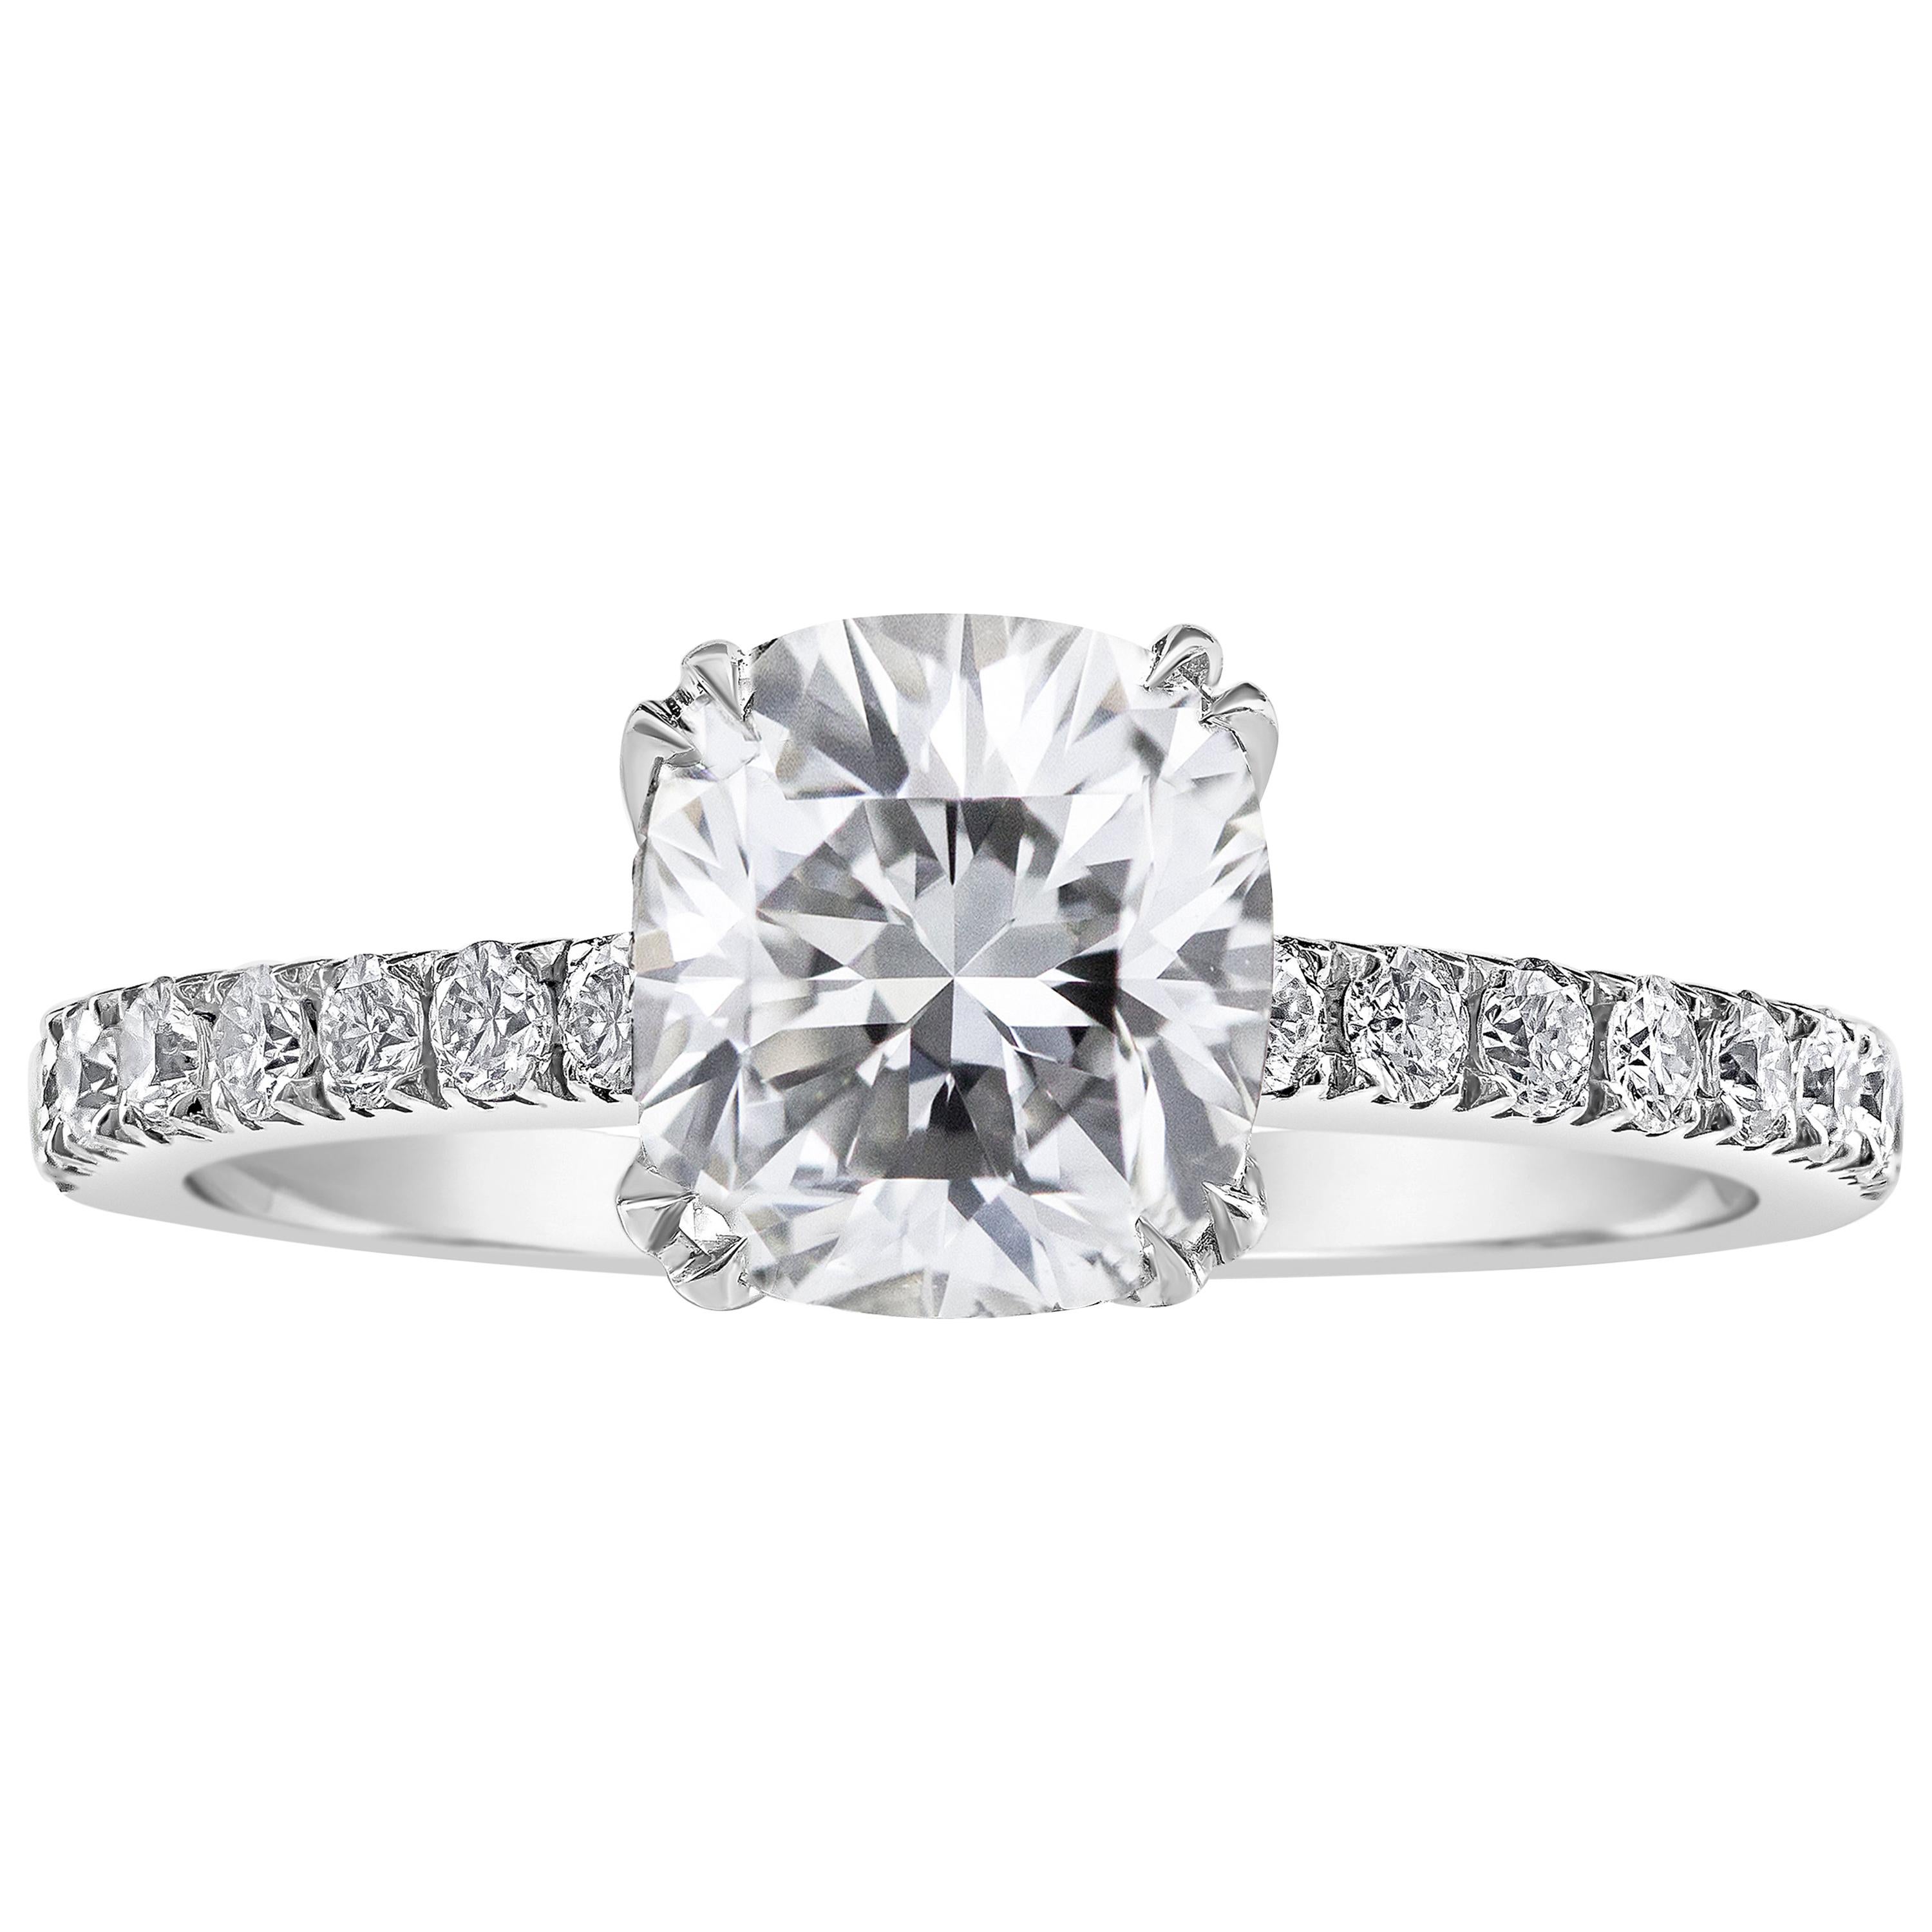 GIA Certified 1.54 Carats Cushion Cut Diamond French Pave Engagement Ring